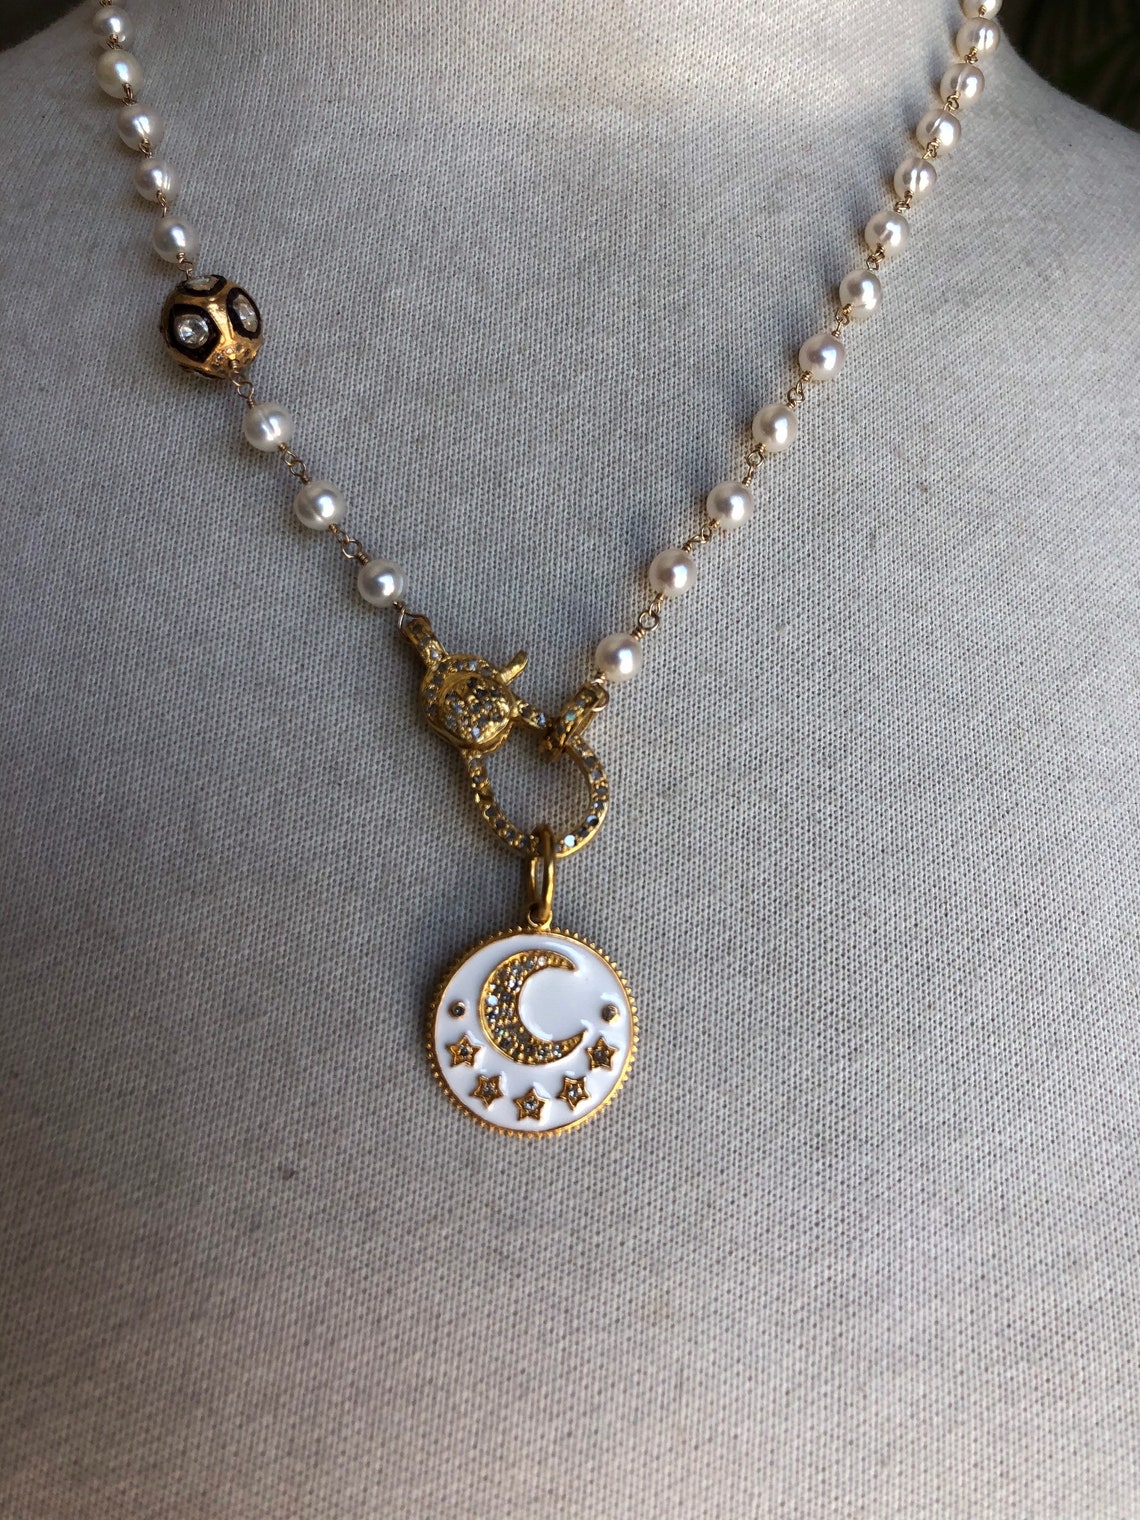 Moon & Star Medallion on Pearl Necklace - Etsy